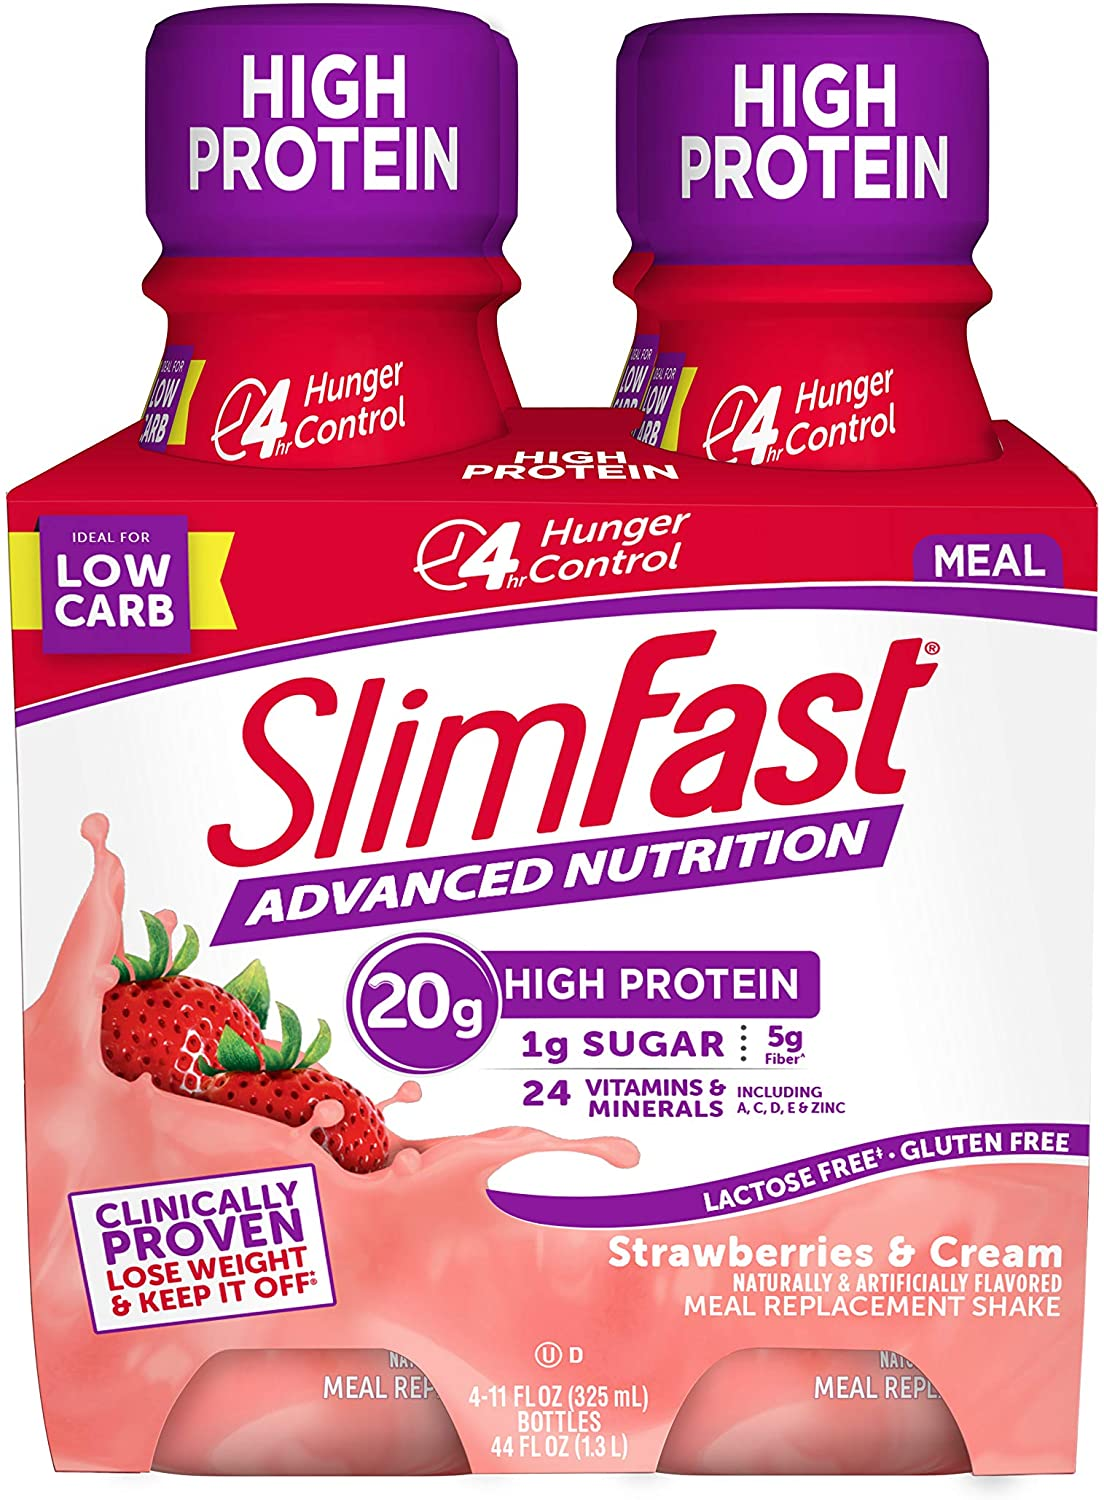 Slimfast Advanced Nutrition High Protein Meal Replacement Shake, Vanilla Cream, 20G of Ready to Drink Protein, 11 Fl. Oz Bottle, 4 Count